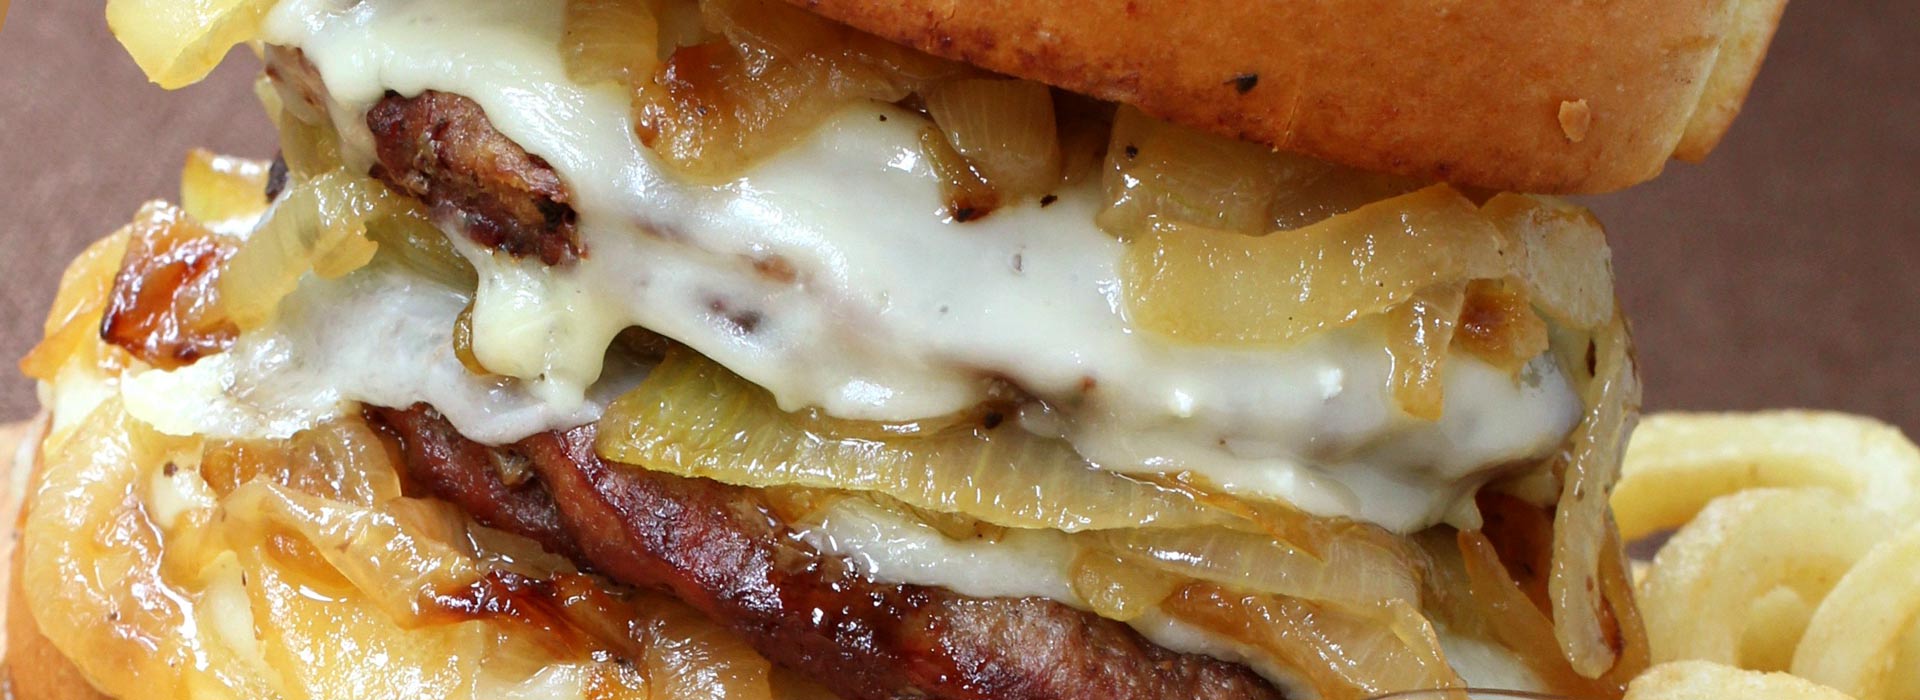 French Onion Field Goal Cheeseburger